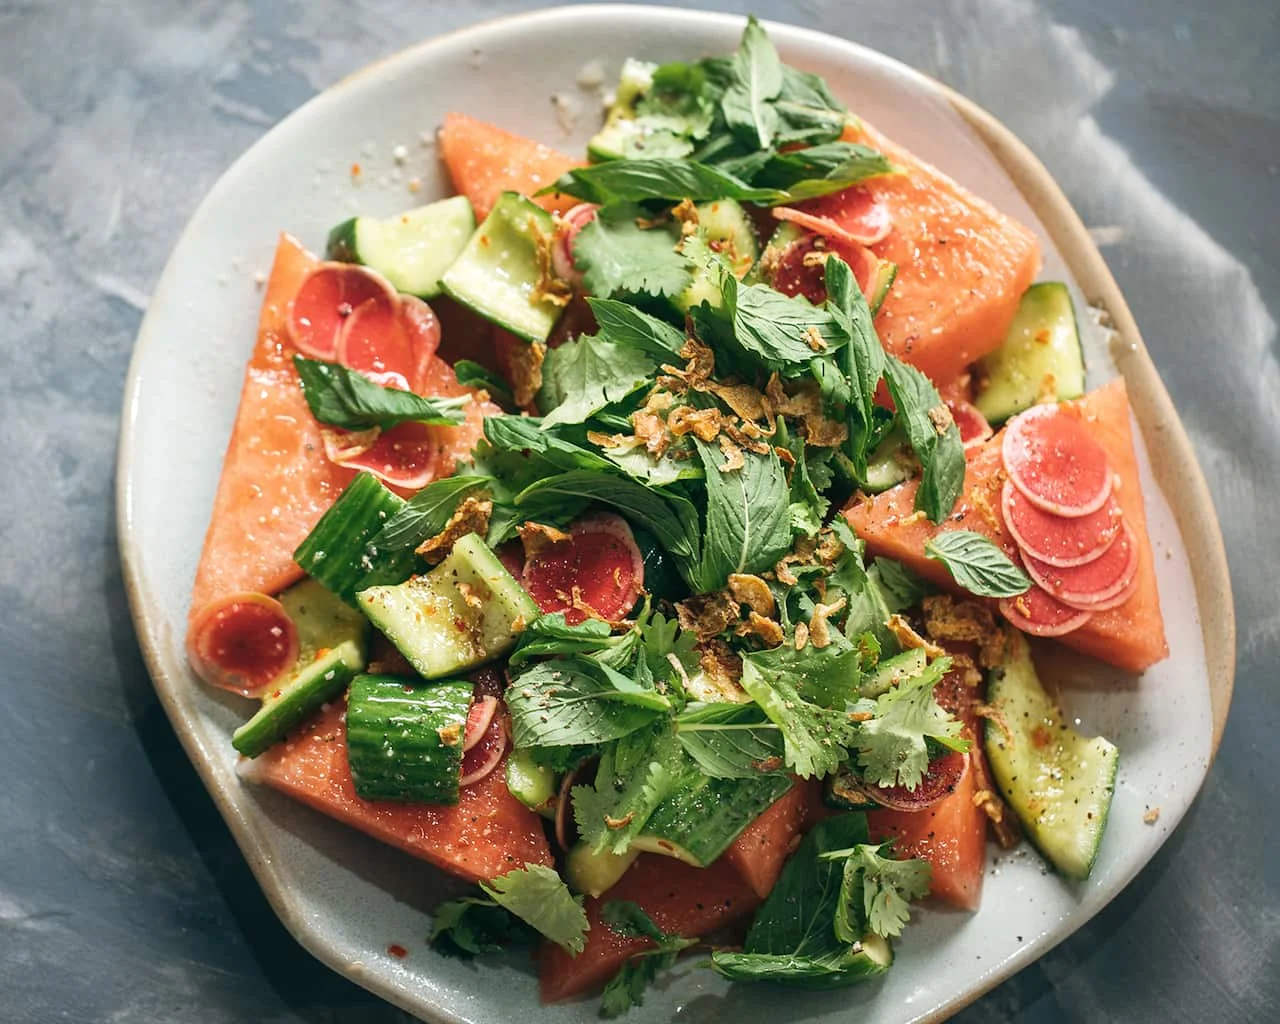 Watermelon and cucumber salad with fish sauce vinaigrette